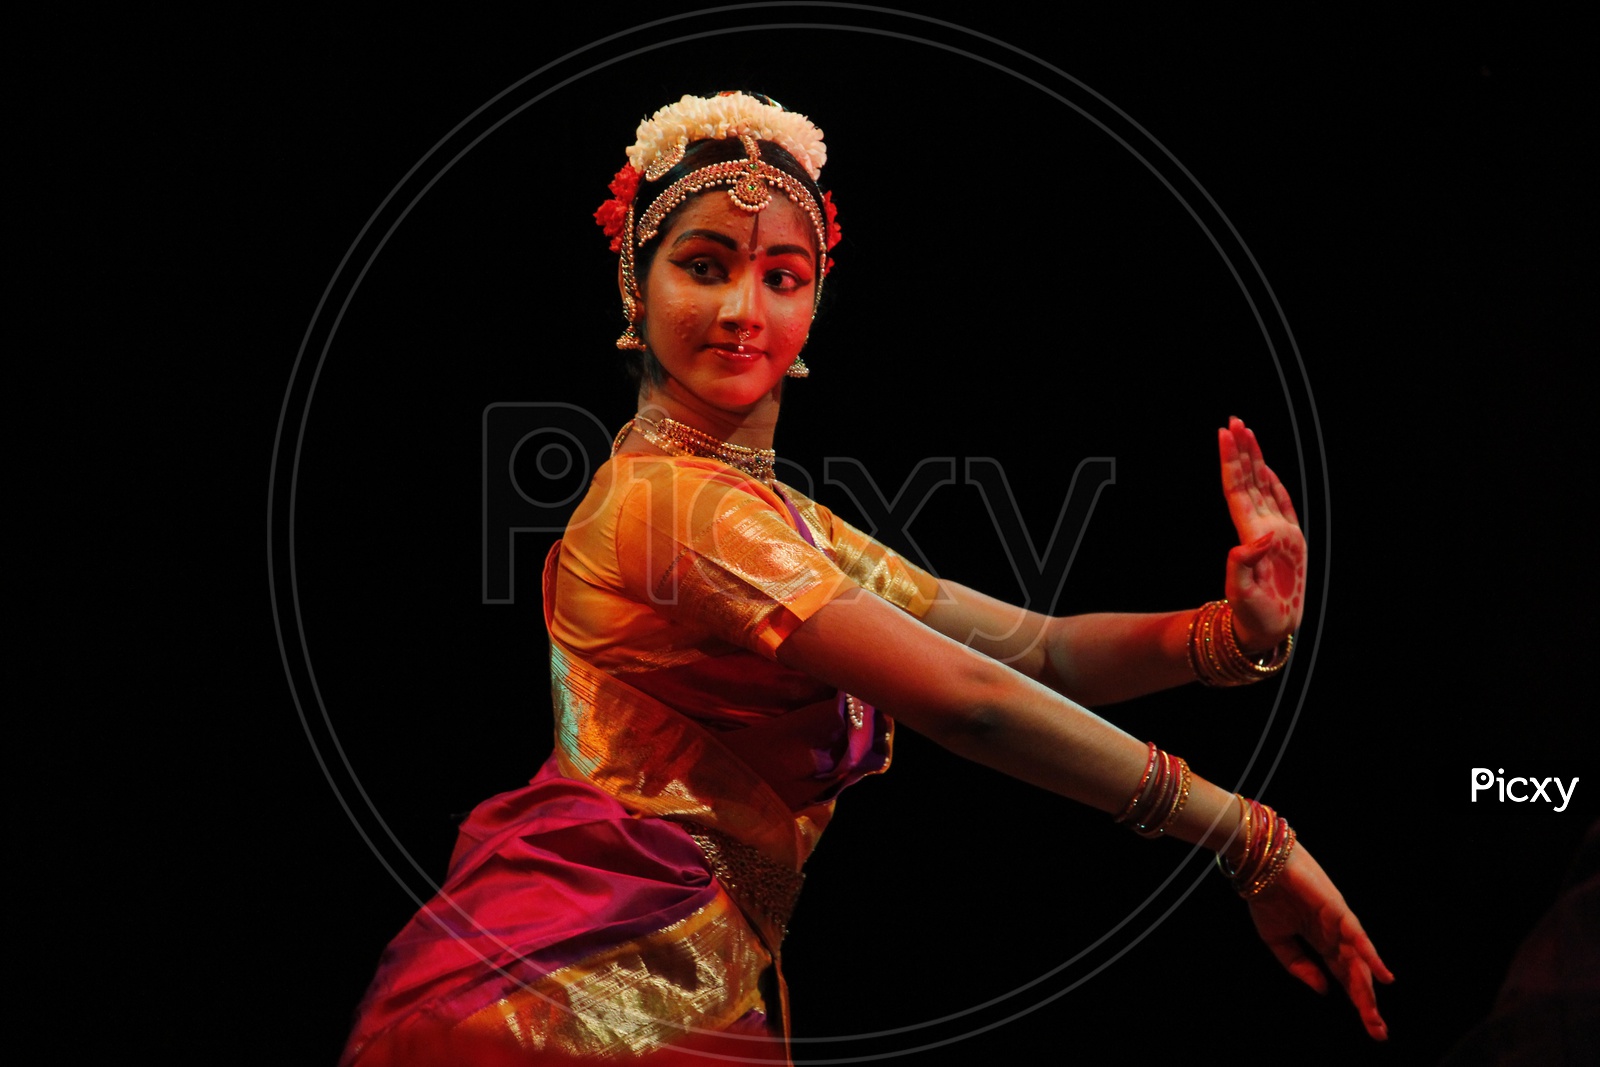 Pin by VIJAY SOMANATH on the classical dance | Indian dance costumes, Bharatanatyam  poses, Dance photography poses